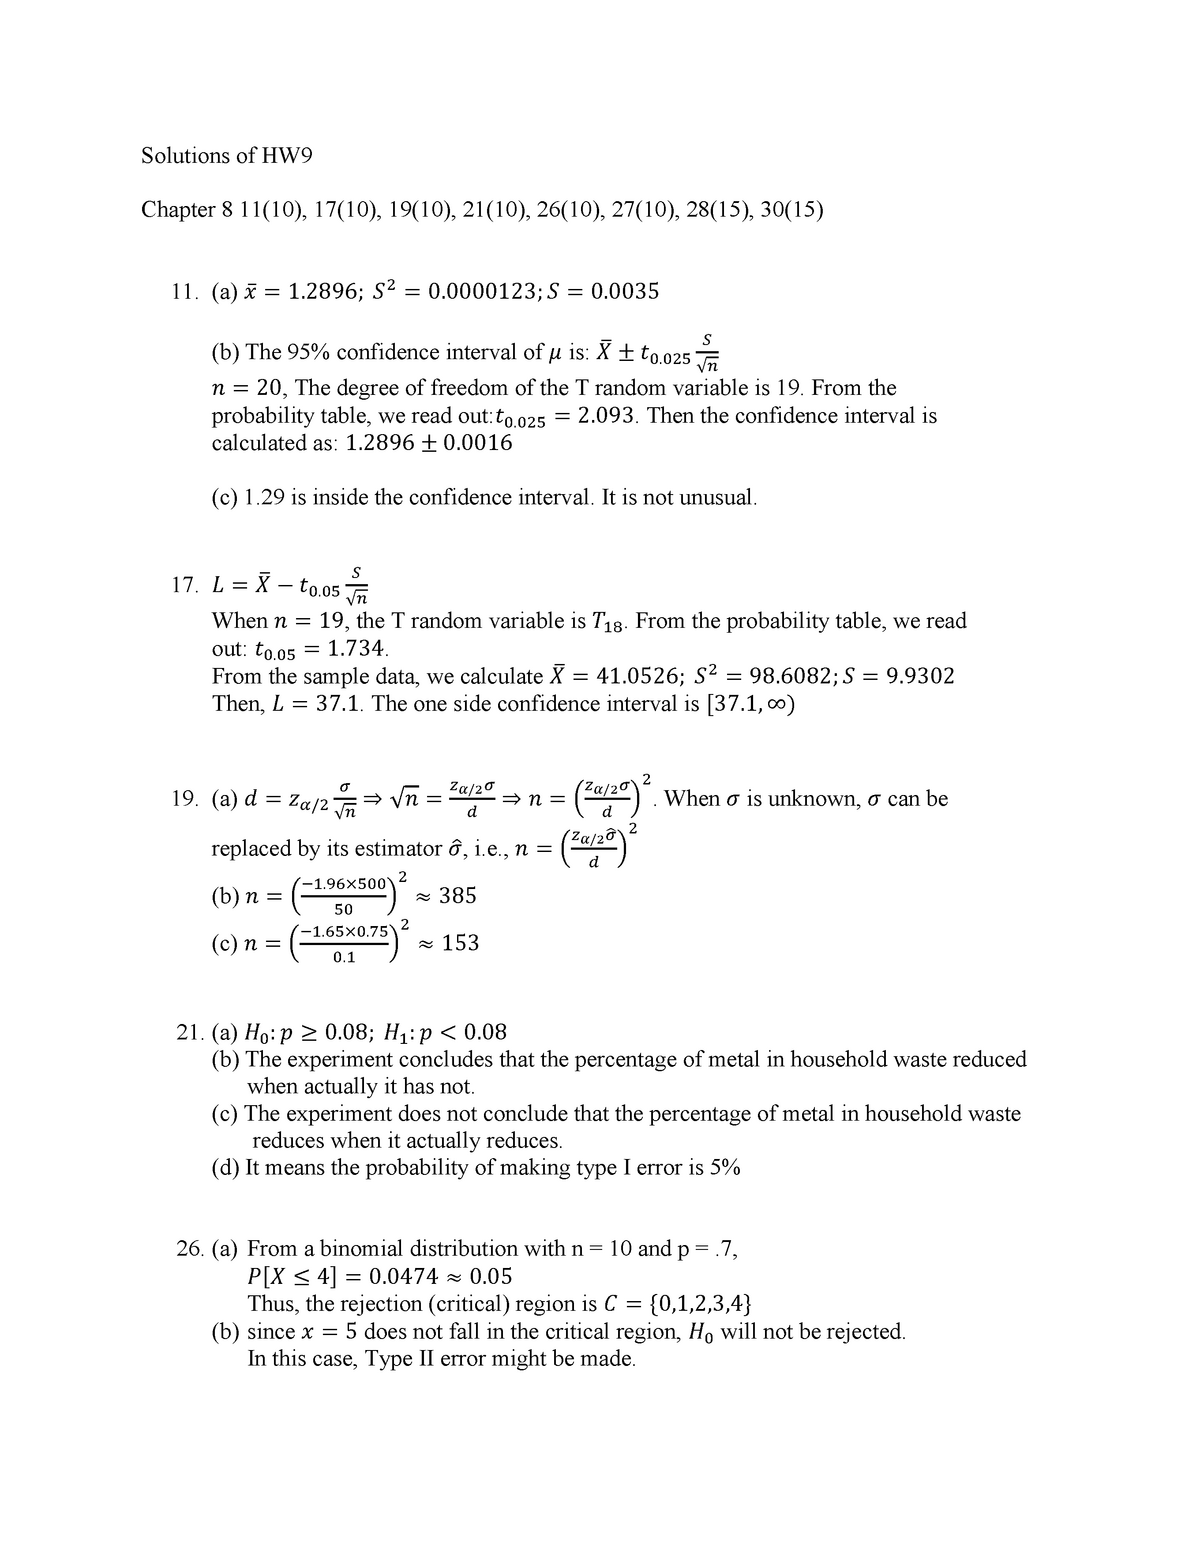 Solution Of Hw9 Sp19 5 326 Solutions Of Hw Chapter 11 10 17 10 19 10 21 10 Studocu